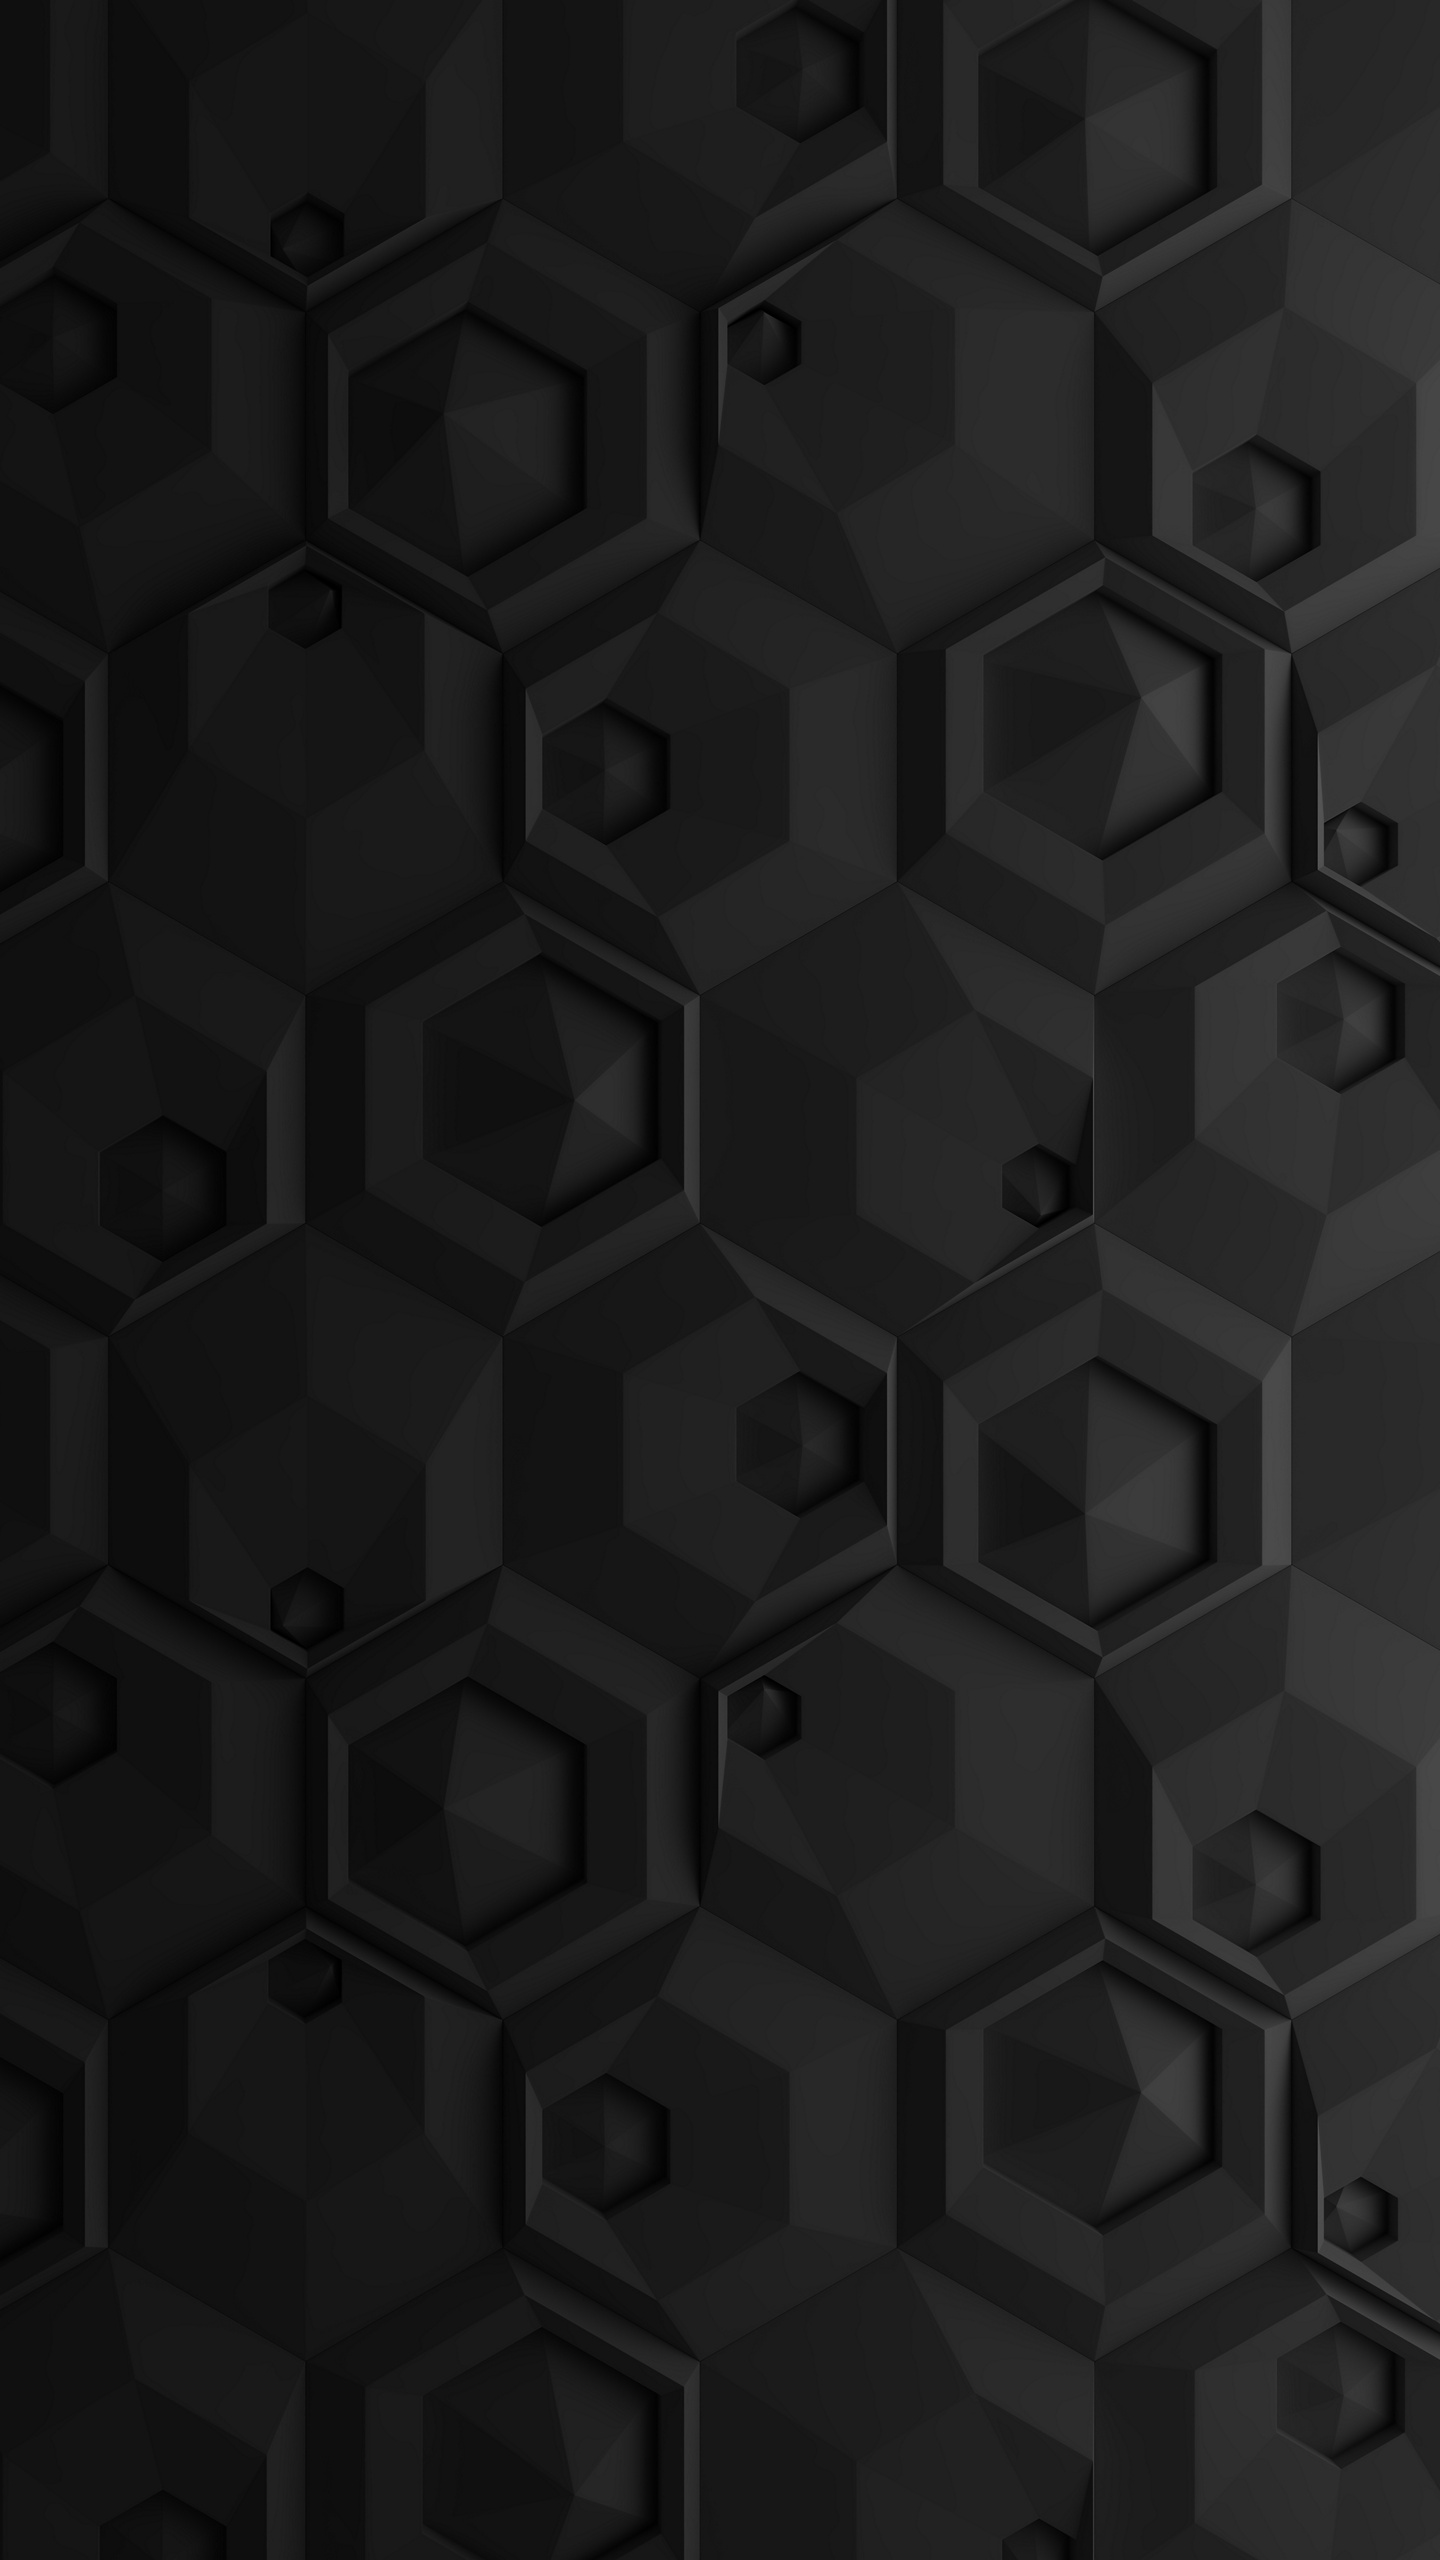 Black hexagon pattern, Material design concept, Abstract graphic art, Clean background, 1440x2560 HD Handy